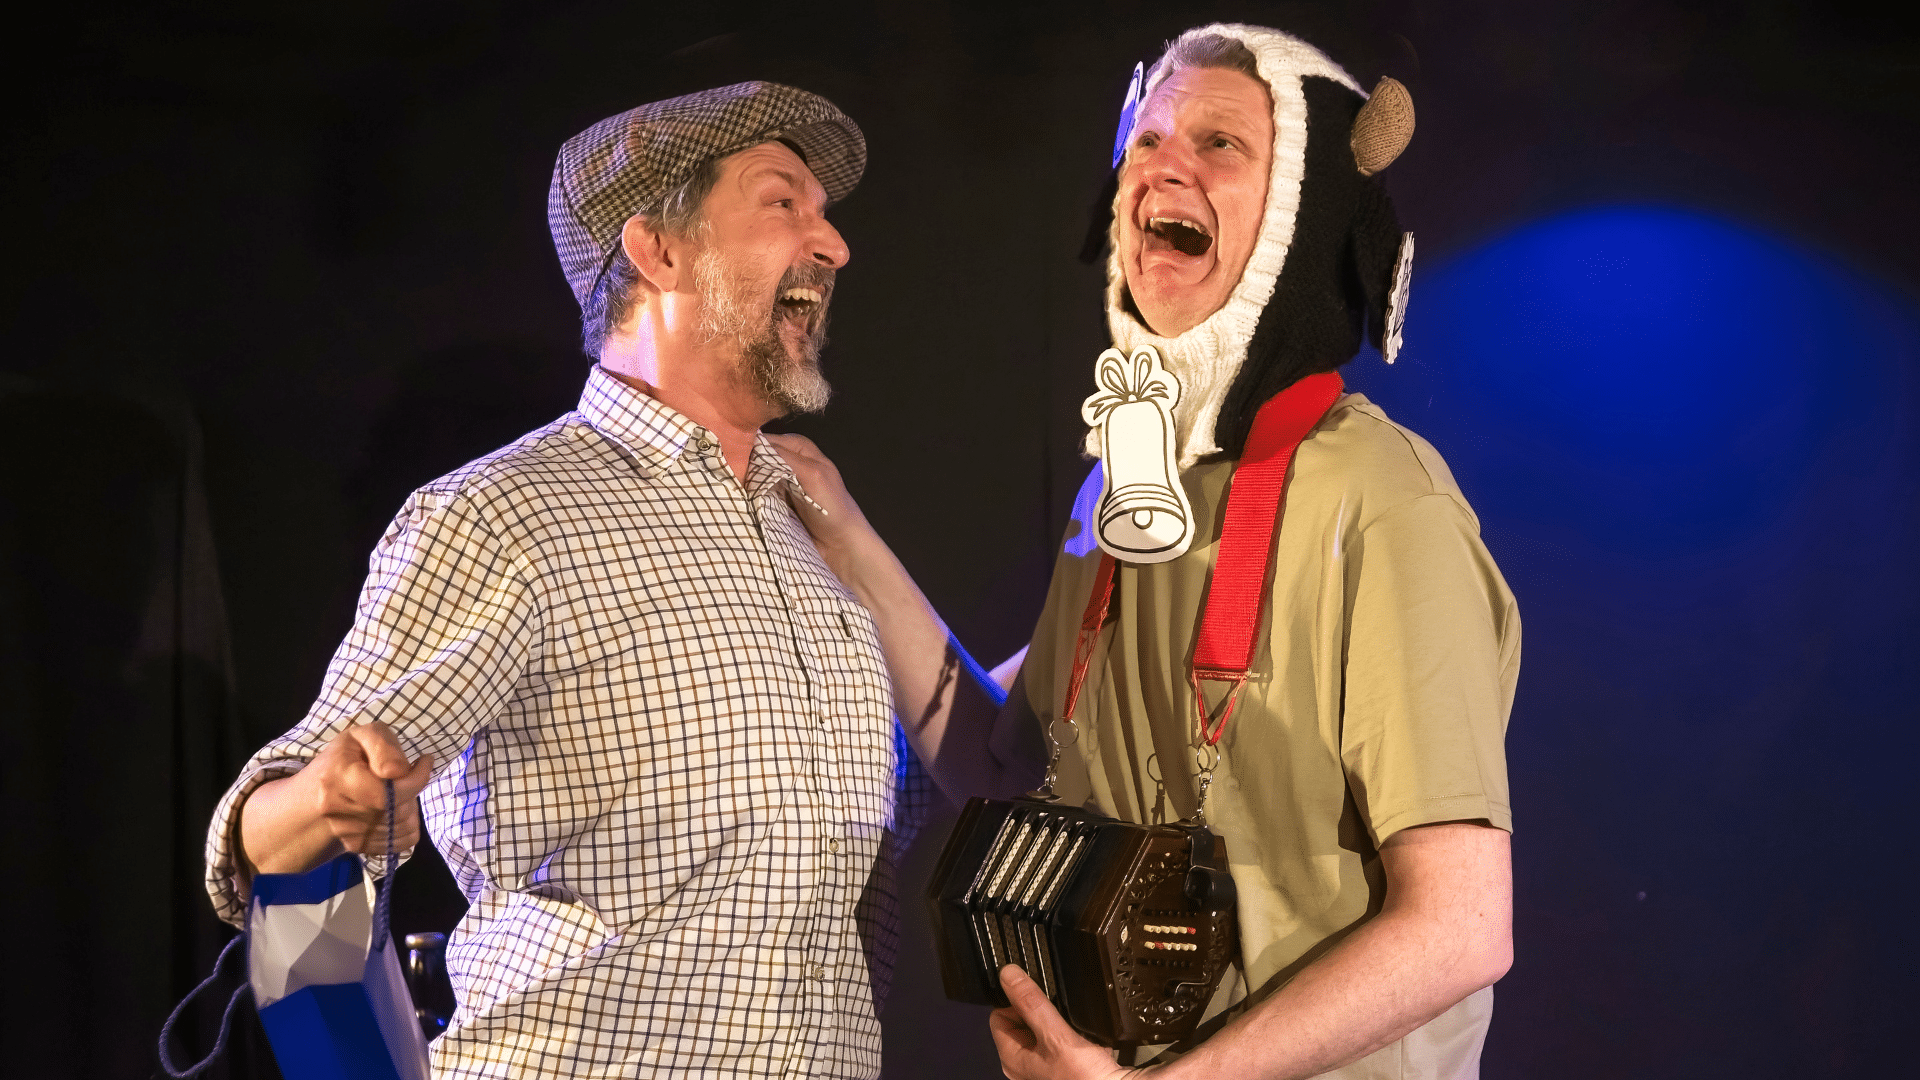 One Man and His Cow production photo - Ian Harris (left) and Stu McLoughlin (right) stood together with an arm each on one another's shoulder. They both have their mouths open as if yelling and Ian faces Stu, while Stu looks upwards, facing his right. Ian wears a farmer-style flat cap and a white square-patterned shirt and holds a blue gift bag in his right hand. Stu wears a knitted balaclava hat with an opening big enough for his full face and patterned black and white like a cow with small cow horns sticking out from the top. He also wears a cream-coloured t-shirt, a cardboard cow bell and an accordion on a strap around the back of his neck. Background: black stage curtain with blue spot light shining on it on the right.